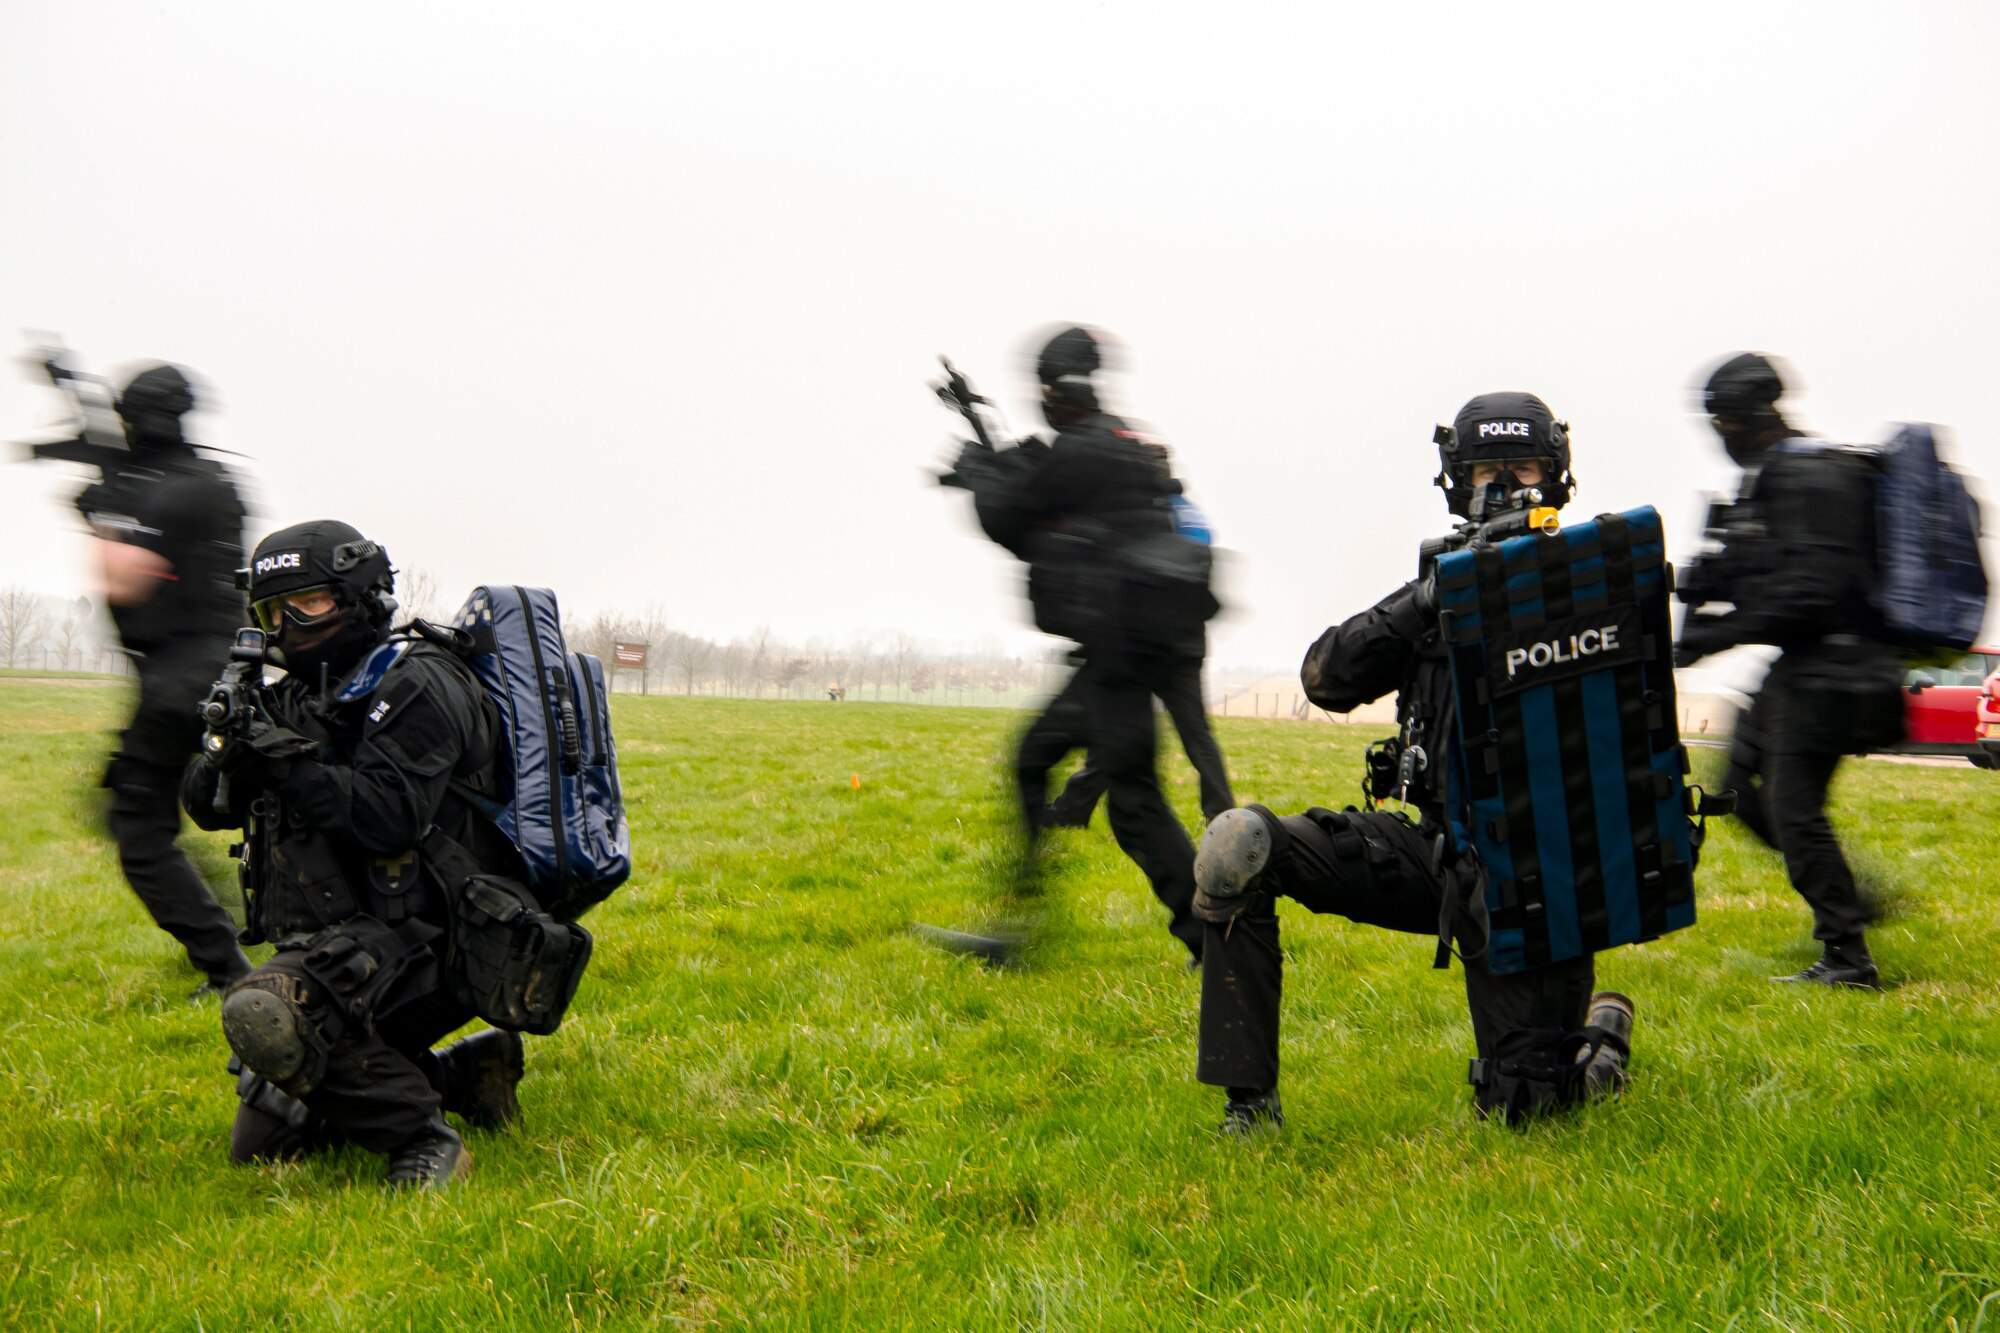 Policemen from the Northamptonshire Police Department, conduct a field training exercise at RAF Croughton, England, Mar. 3, 2021. The NHPD utilized the 422d Security Forces Squadron training complex to help strengthen their tactics and techniques. Events like this help strengthen the local partnership between the 422d SFS and the NHPD. (U.S. Air Force photo by Senior Airman Eugene Oliver)